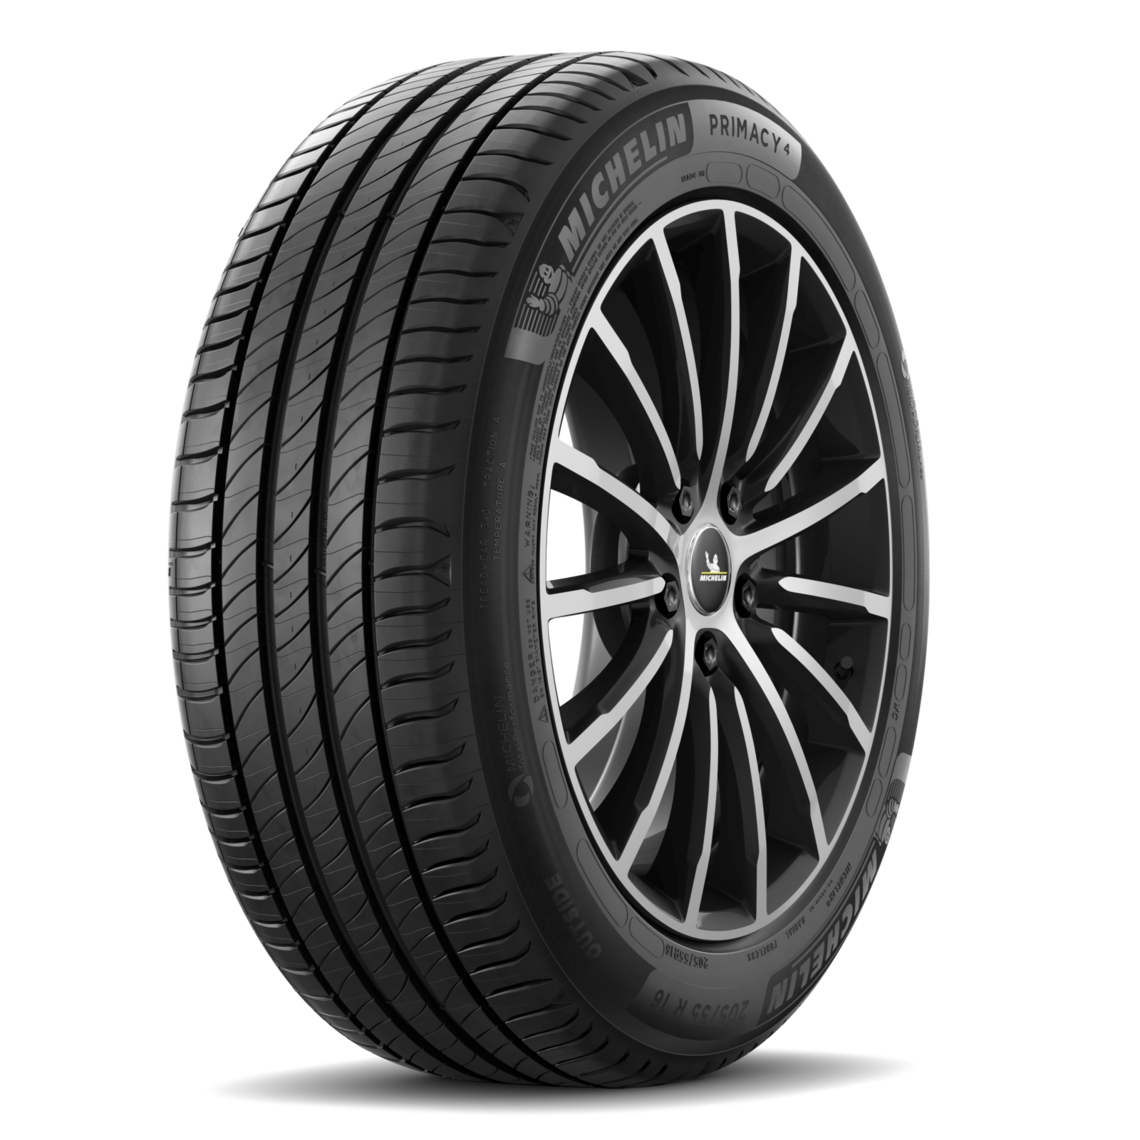 Michelin Primacy 4 - Tire Reviews and Tests